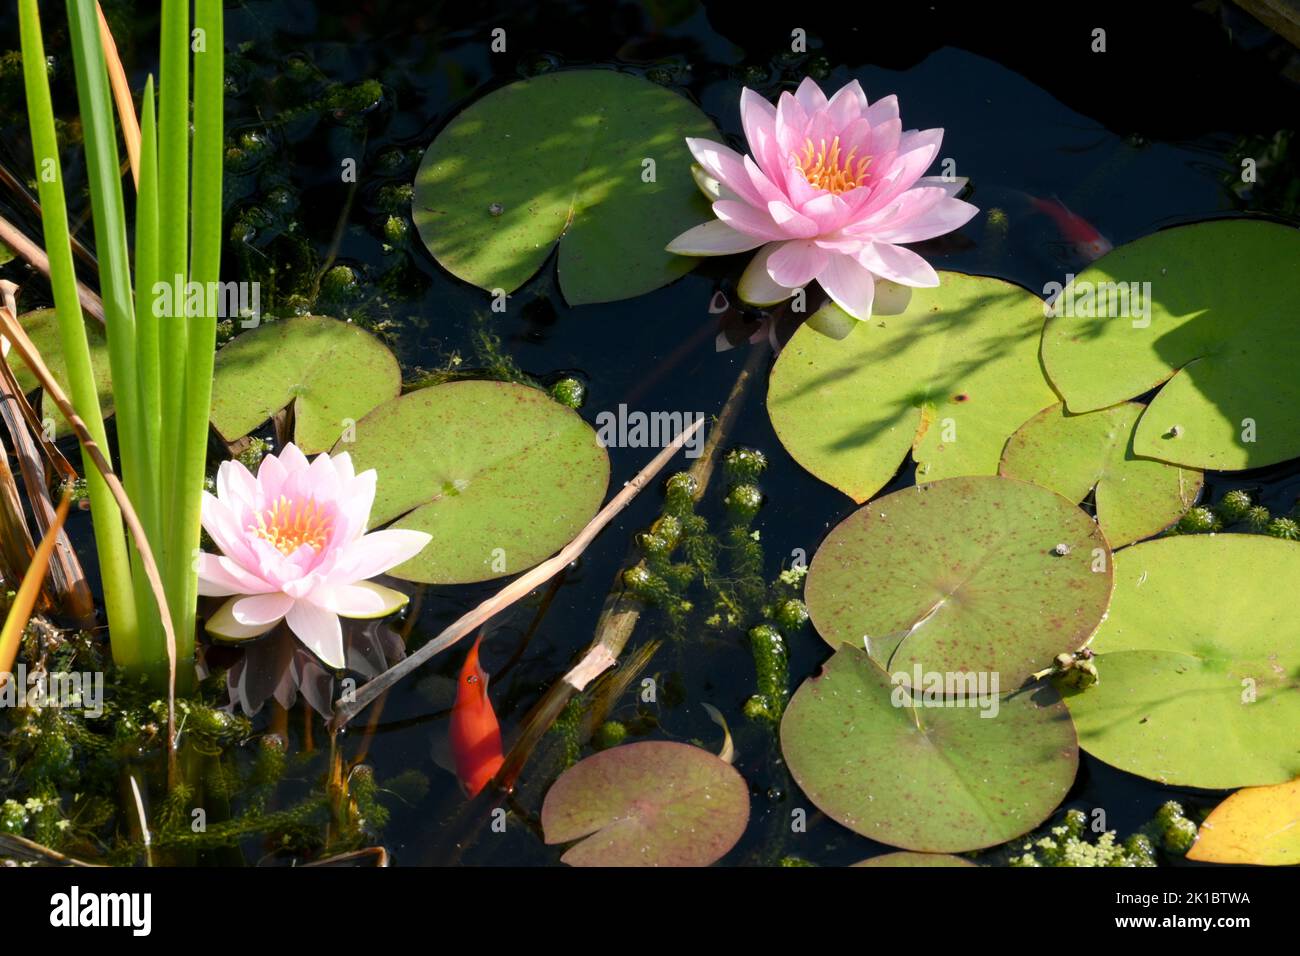 Garden pond. Two Goldfish shade beneath the flowering Lillies' broad leaves. The Canadian pondweed provides oxygen and Iris add extra spring color. Stock Photo